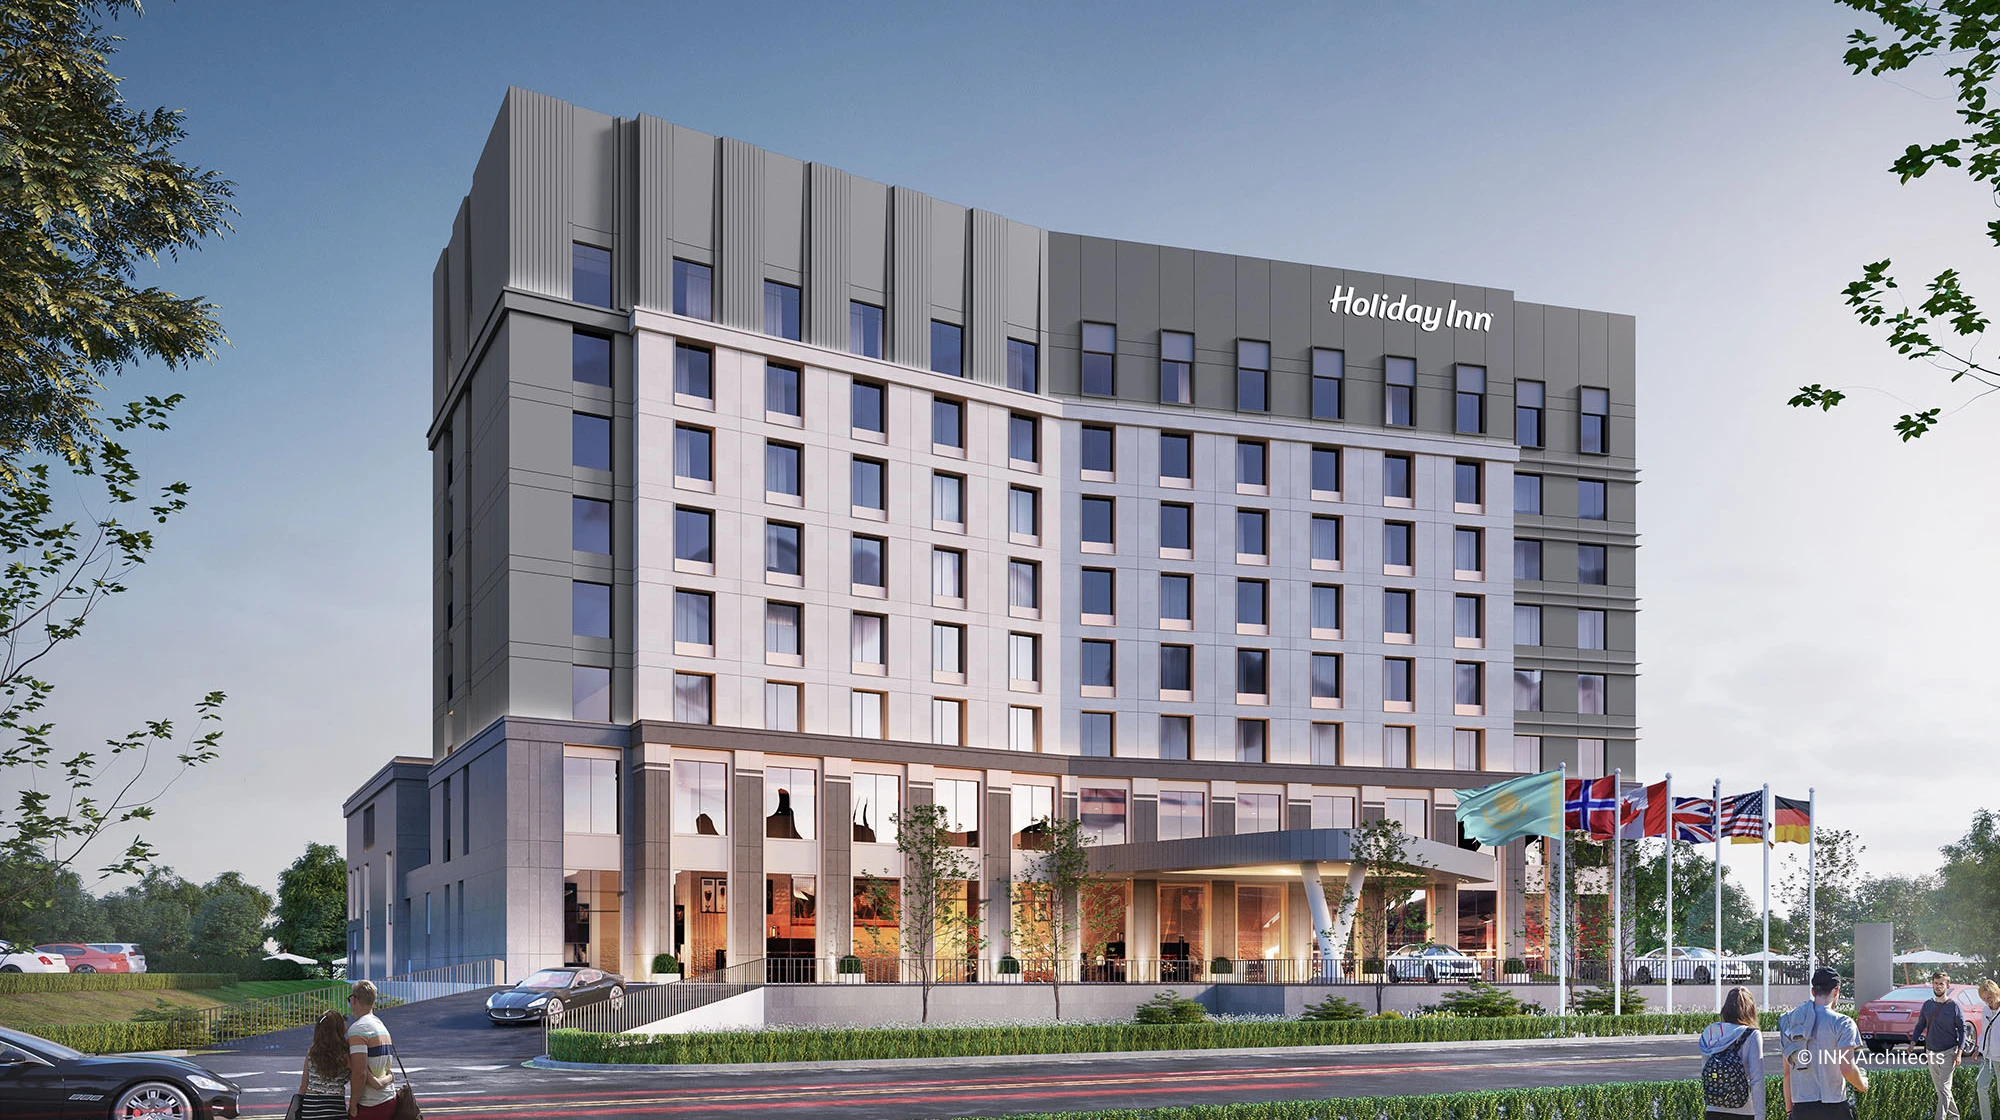 Architectural design of the hotel Holiday Inn. Architectural design, hotel design services. Architectural bureau INK Architects